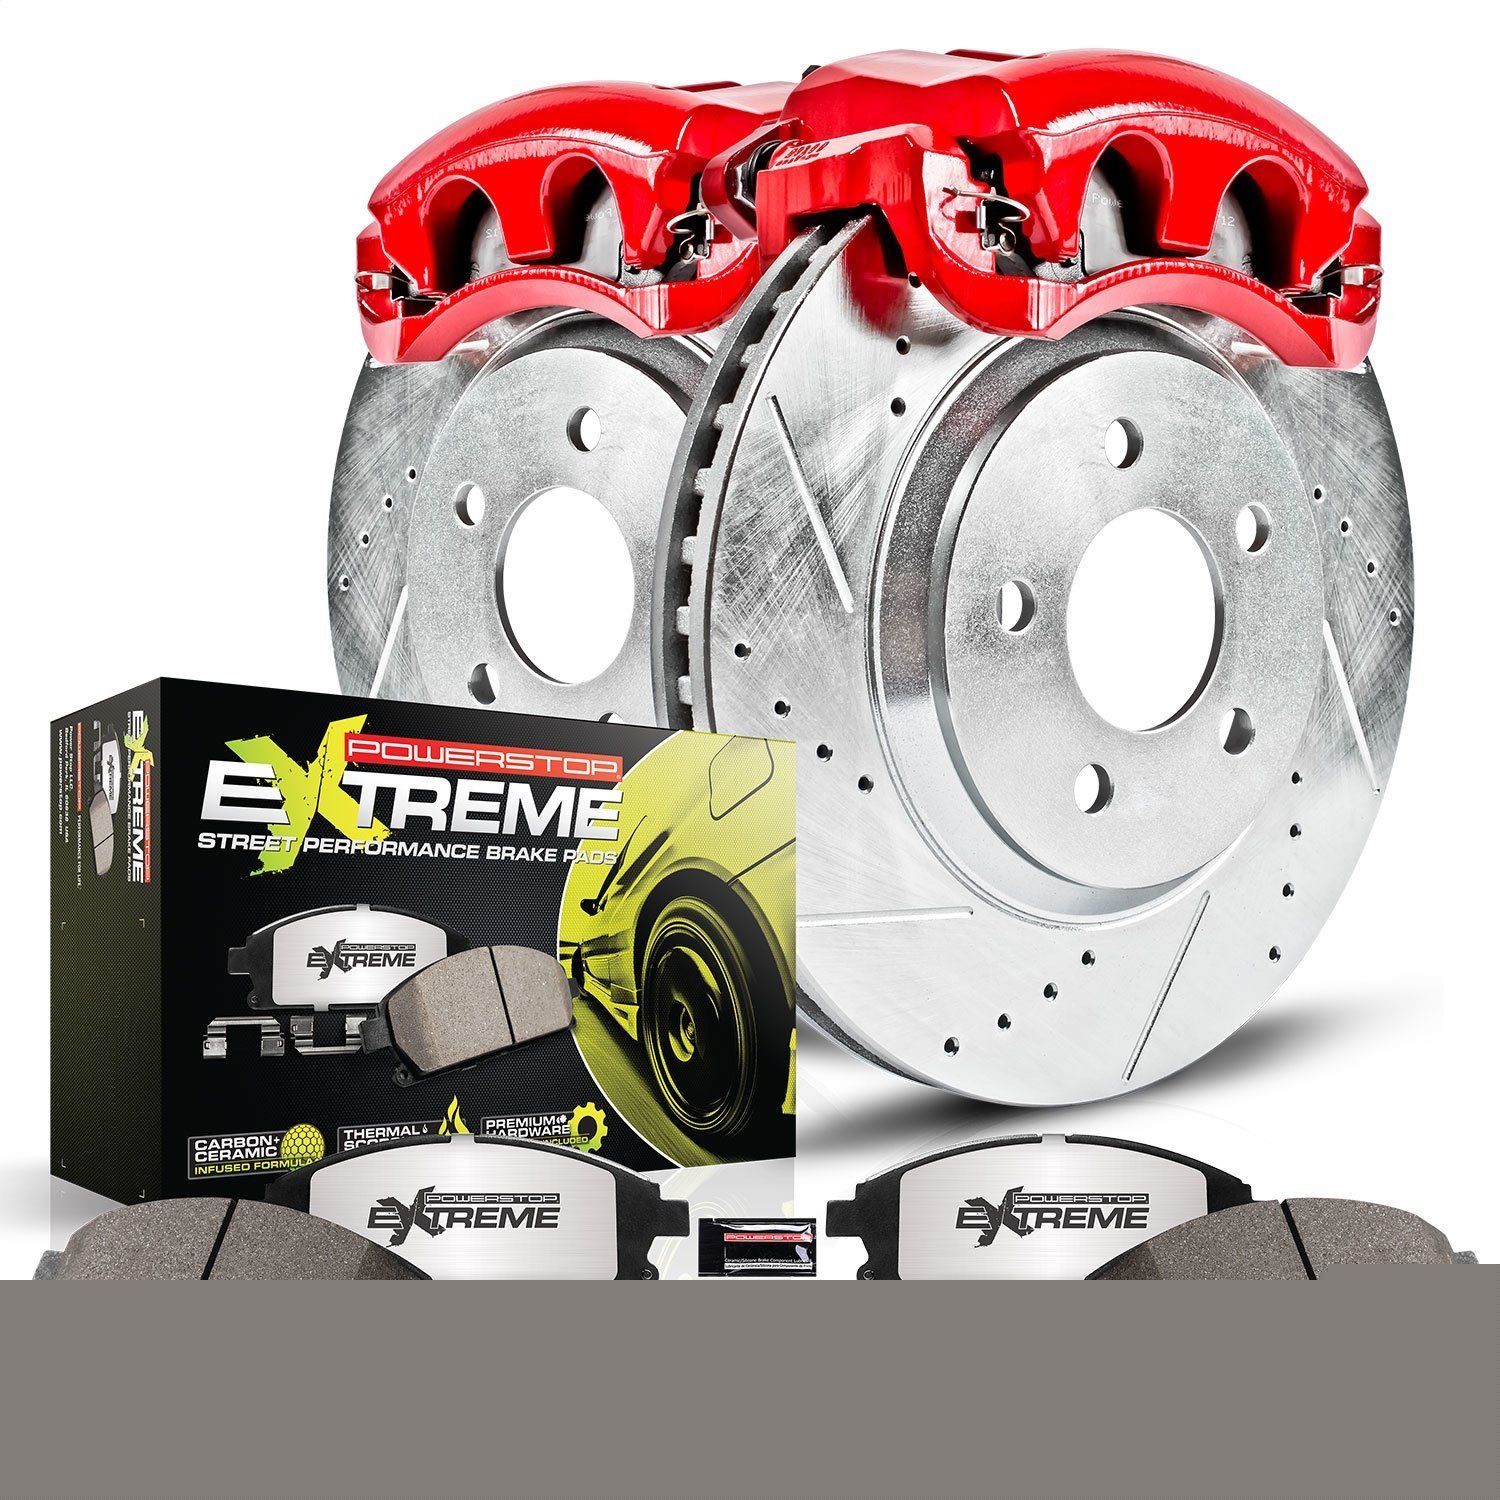 Street Warrior Brake Upgrade Kit Cross-Drilled and Slotted Rotors